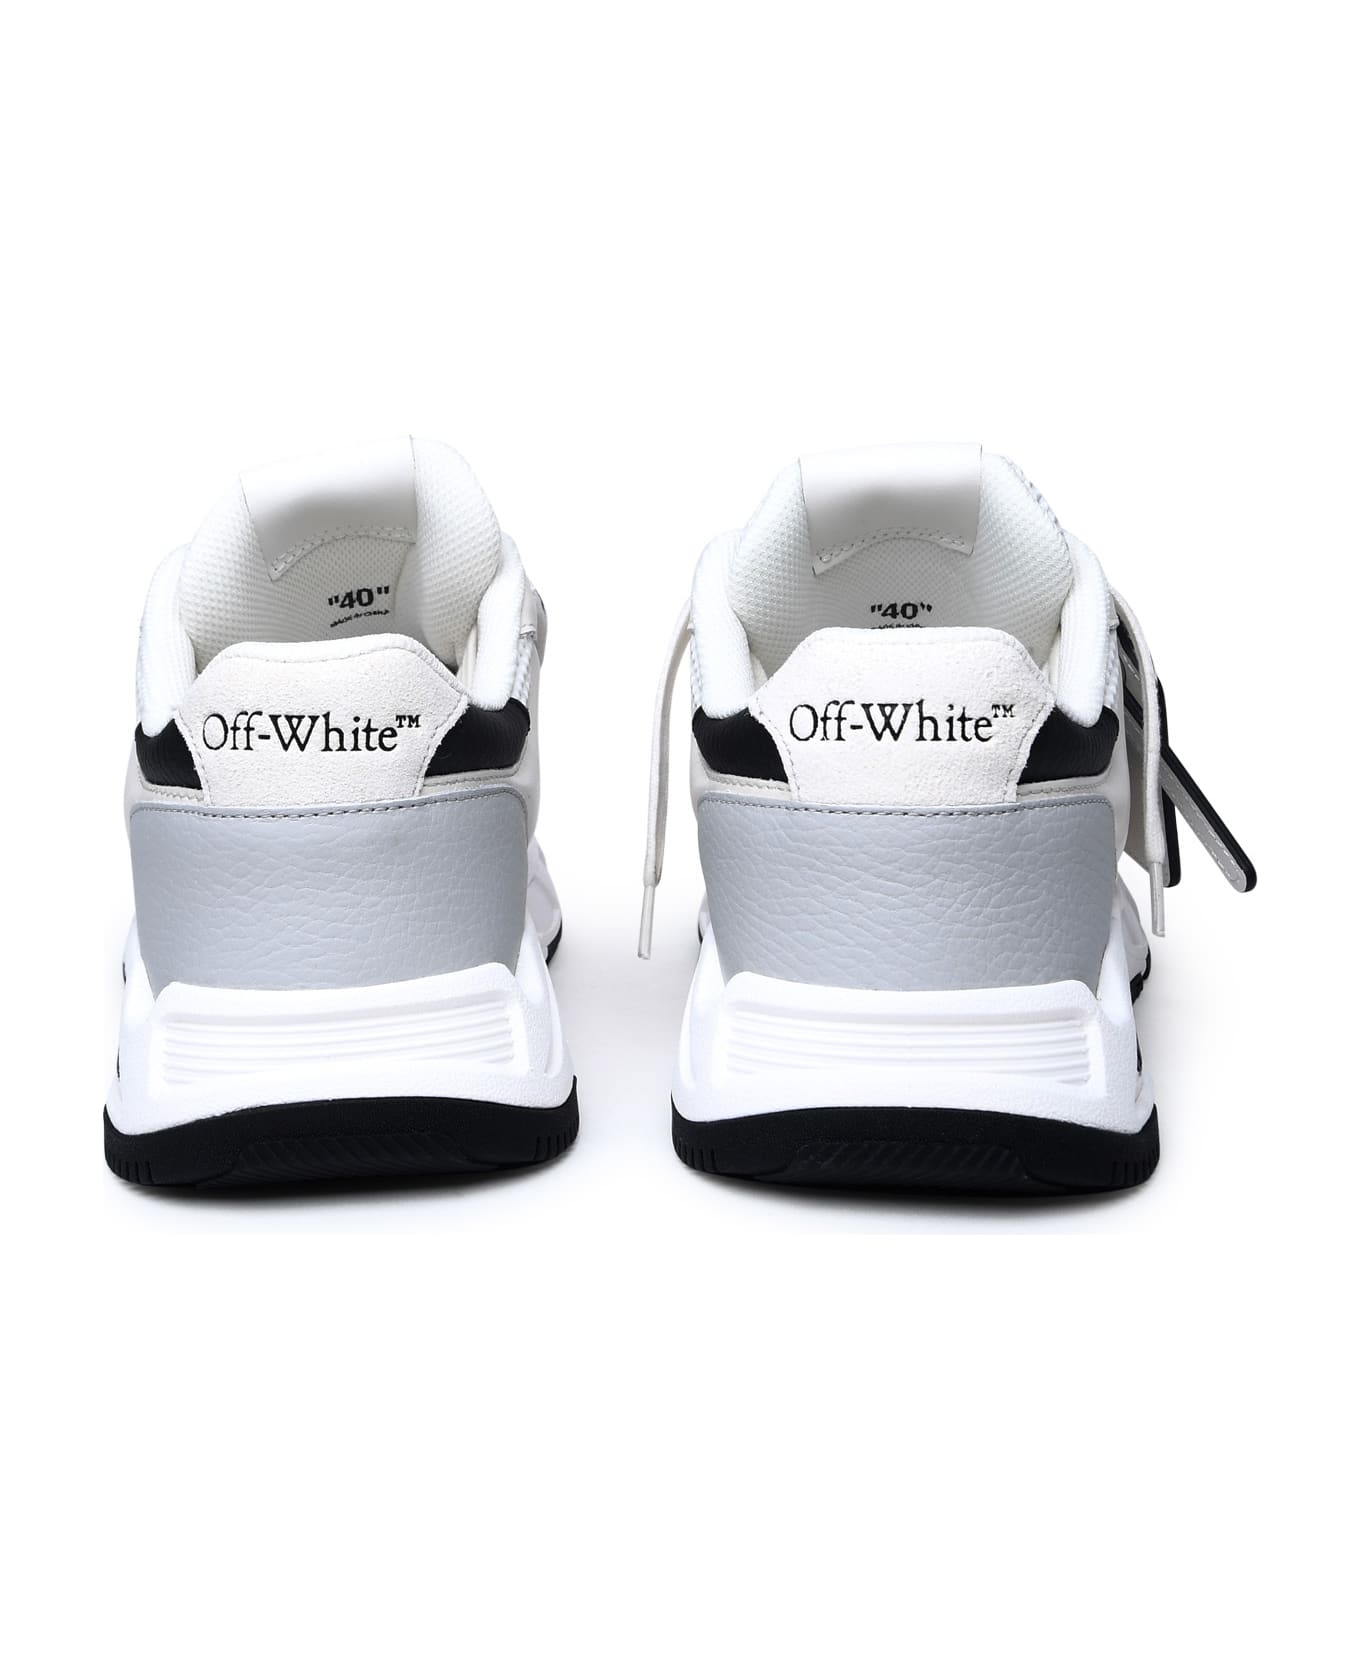 Off-White White Leather Blend Sneakers - White